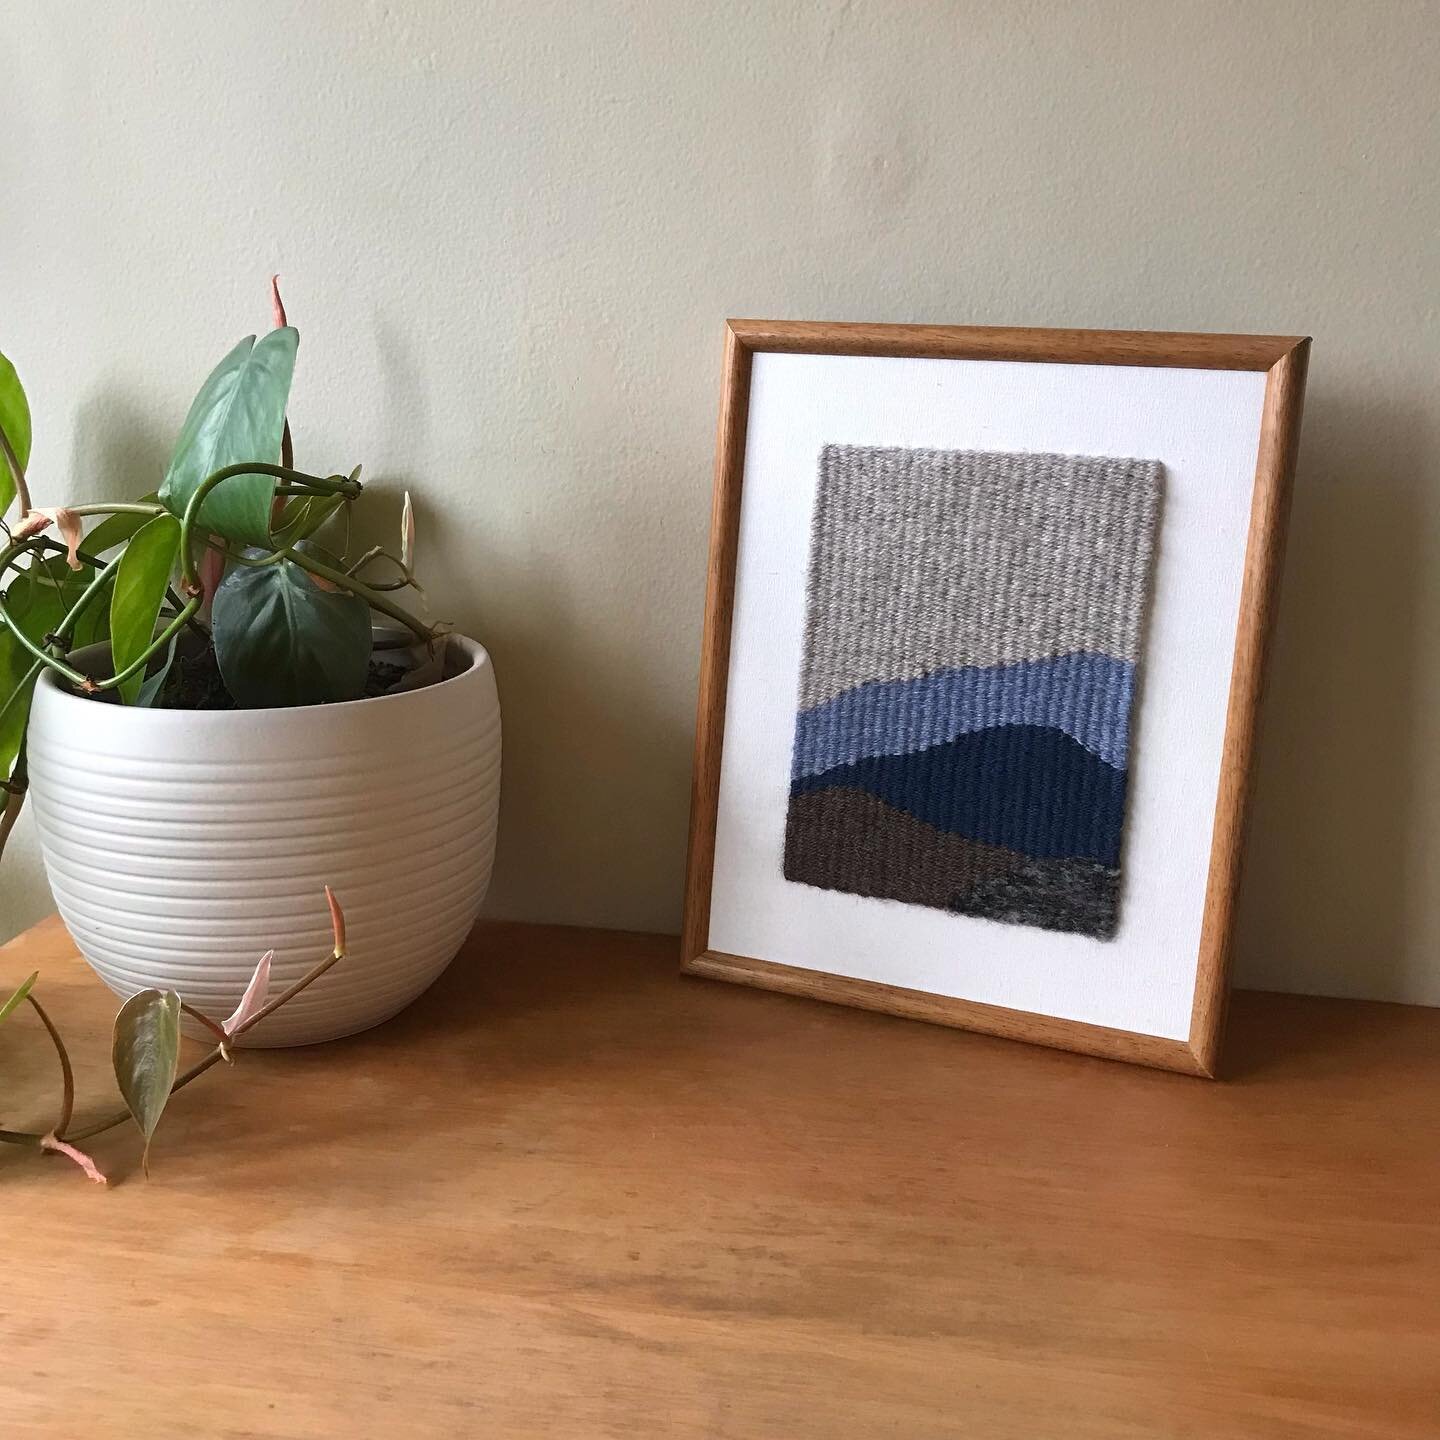 Blue Mountains. 22.5 x 27.5cm, wool and cotton in a wood frame. $50 plus postage. I start teaching again in a few weeks so before that happens, I thought I&rsquo;d make a small weaving. I love the calming colours of the hills. DM if you&rsquo;d like 